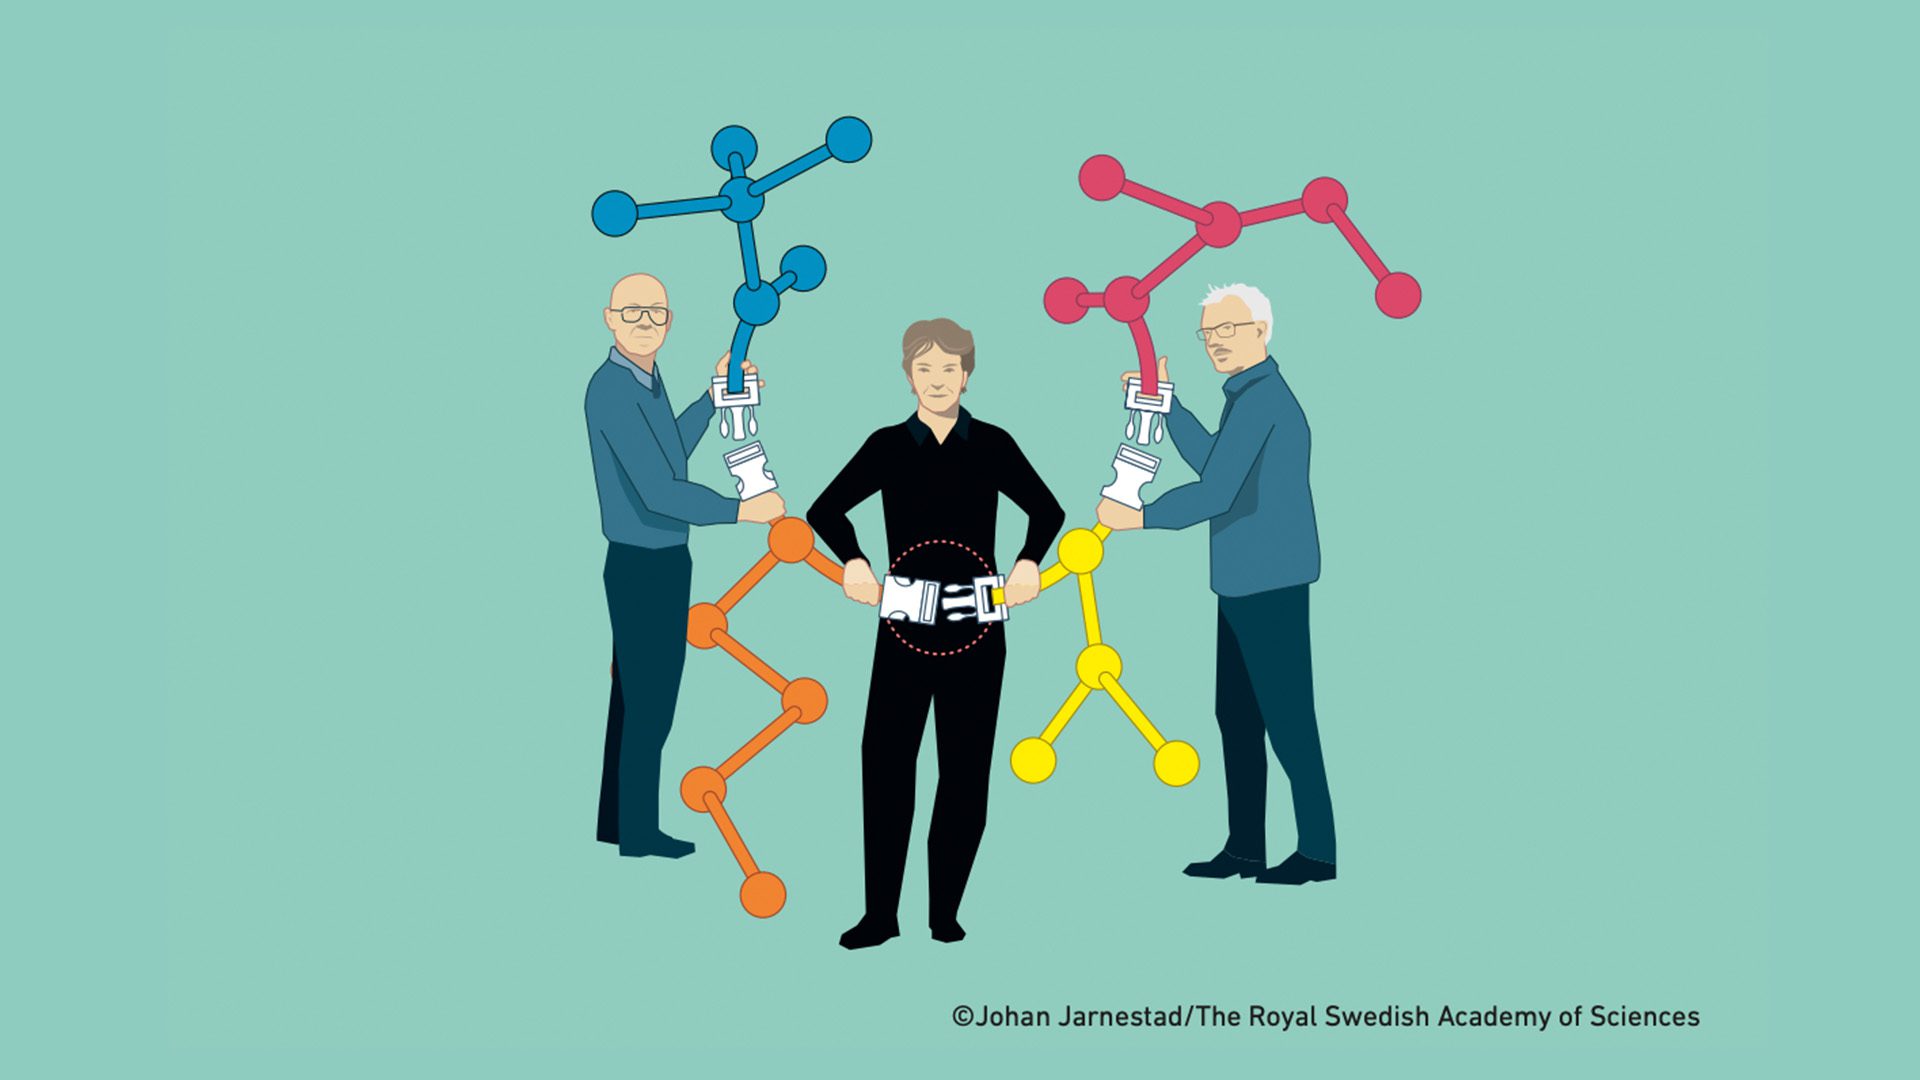 The Nobel Prize in Chemistry 2022 was awarded to Barry Sharpless, Morten Meldal, and Carolyn Bertozzi